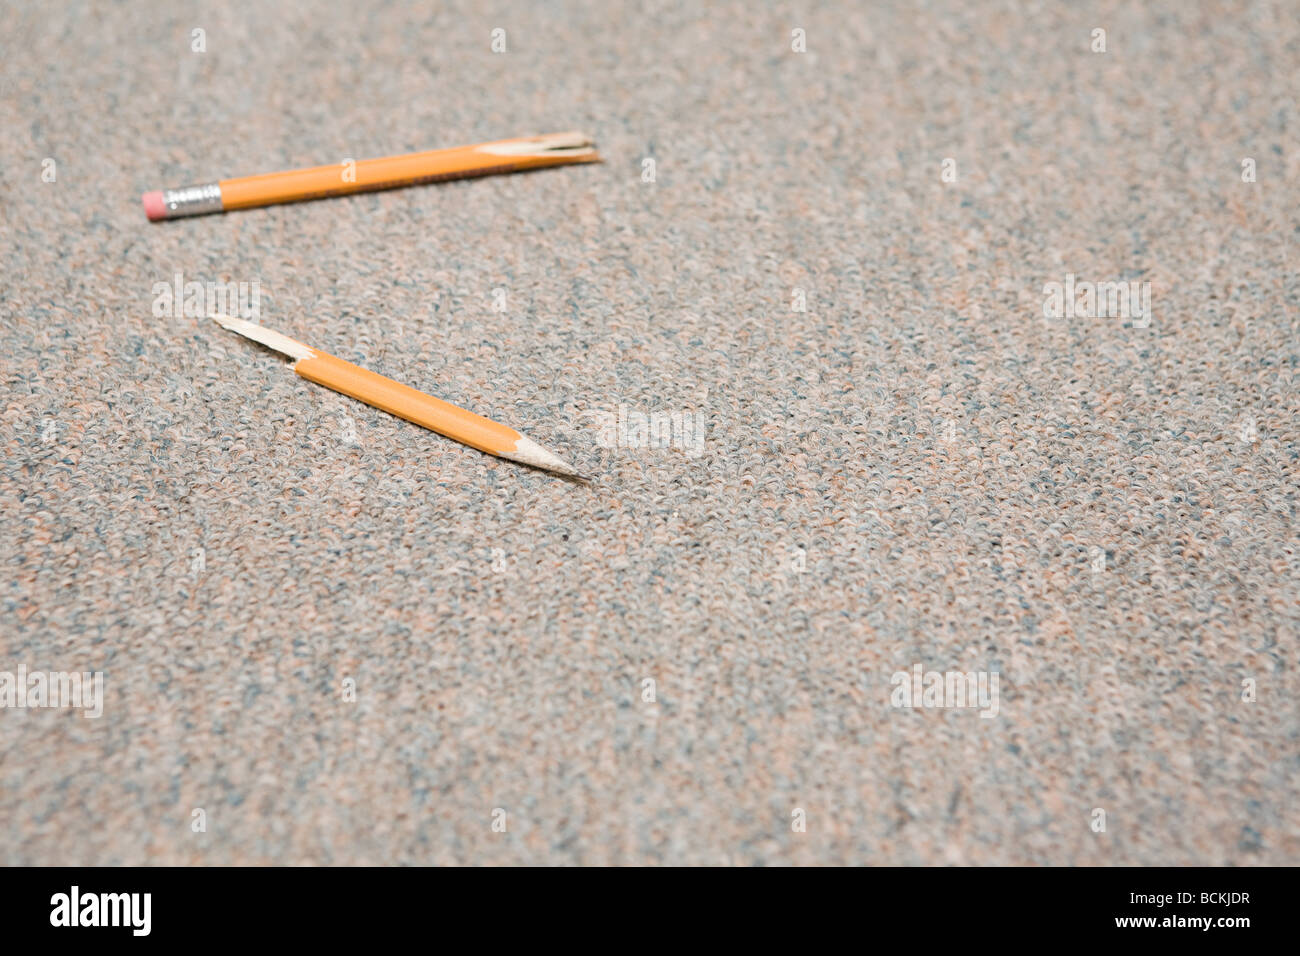 Pencil that has been snapped in frustration Stock Photo